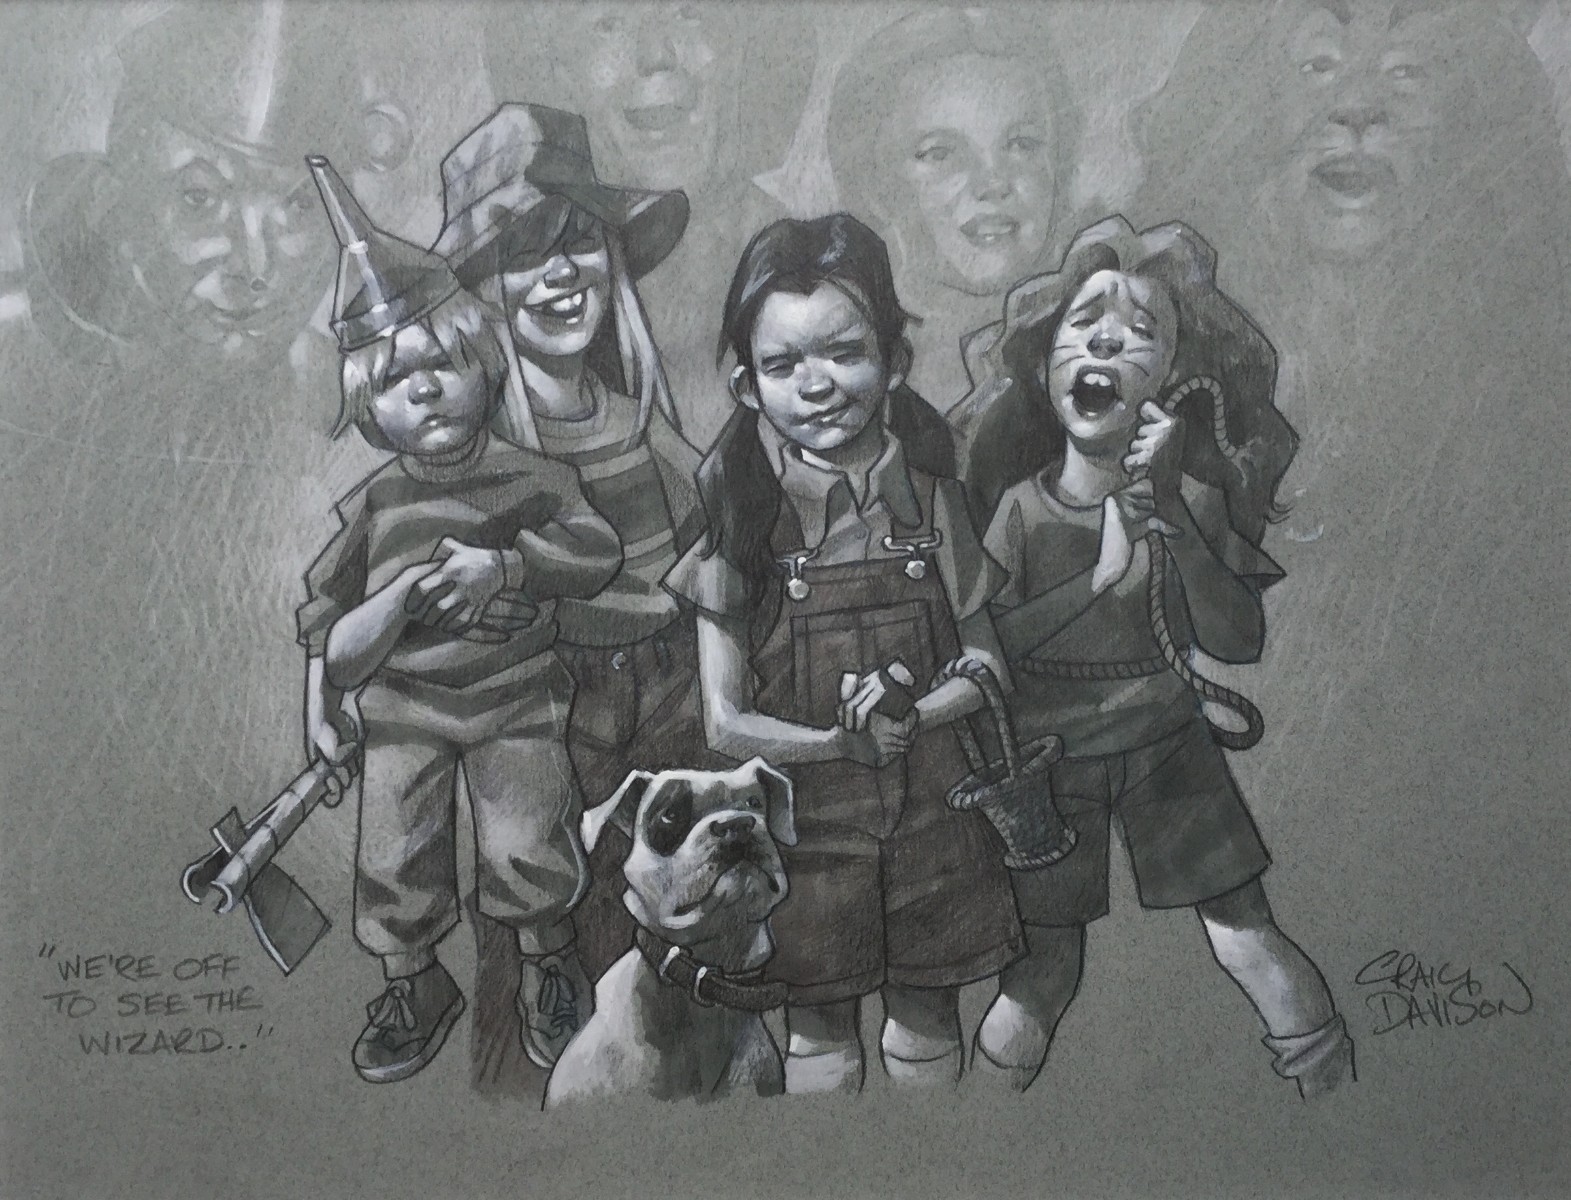 We\u0027re off to see the Wizard by Craig Davison